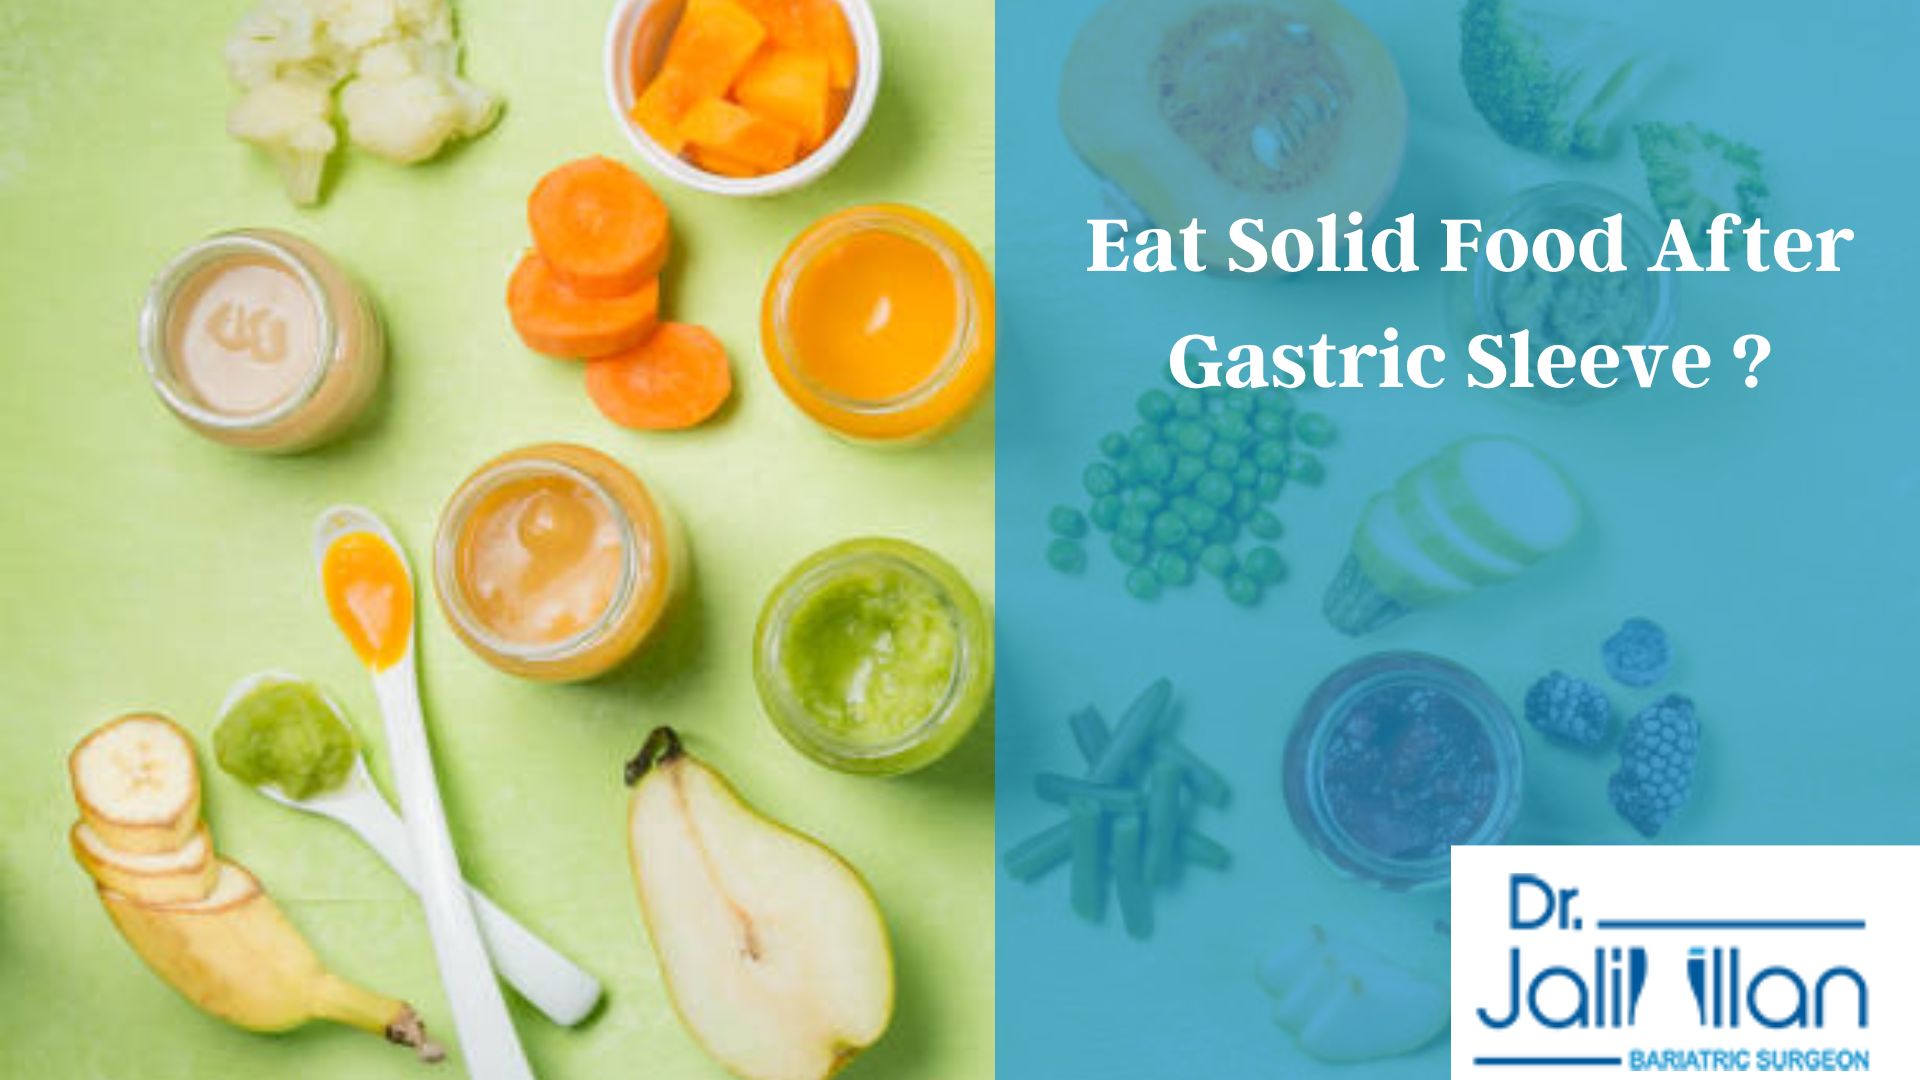 Solid food after gastric sleeve